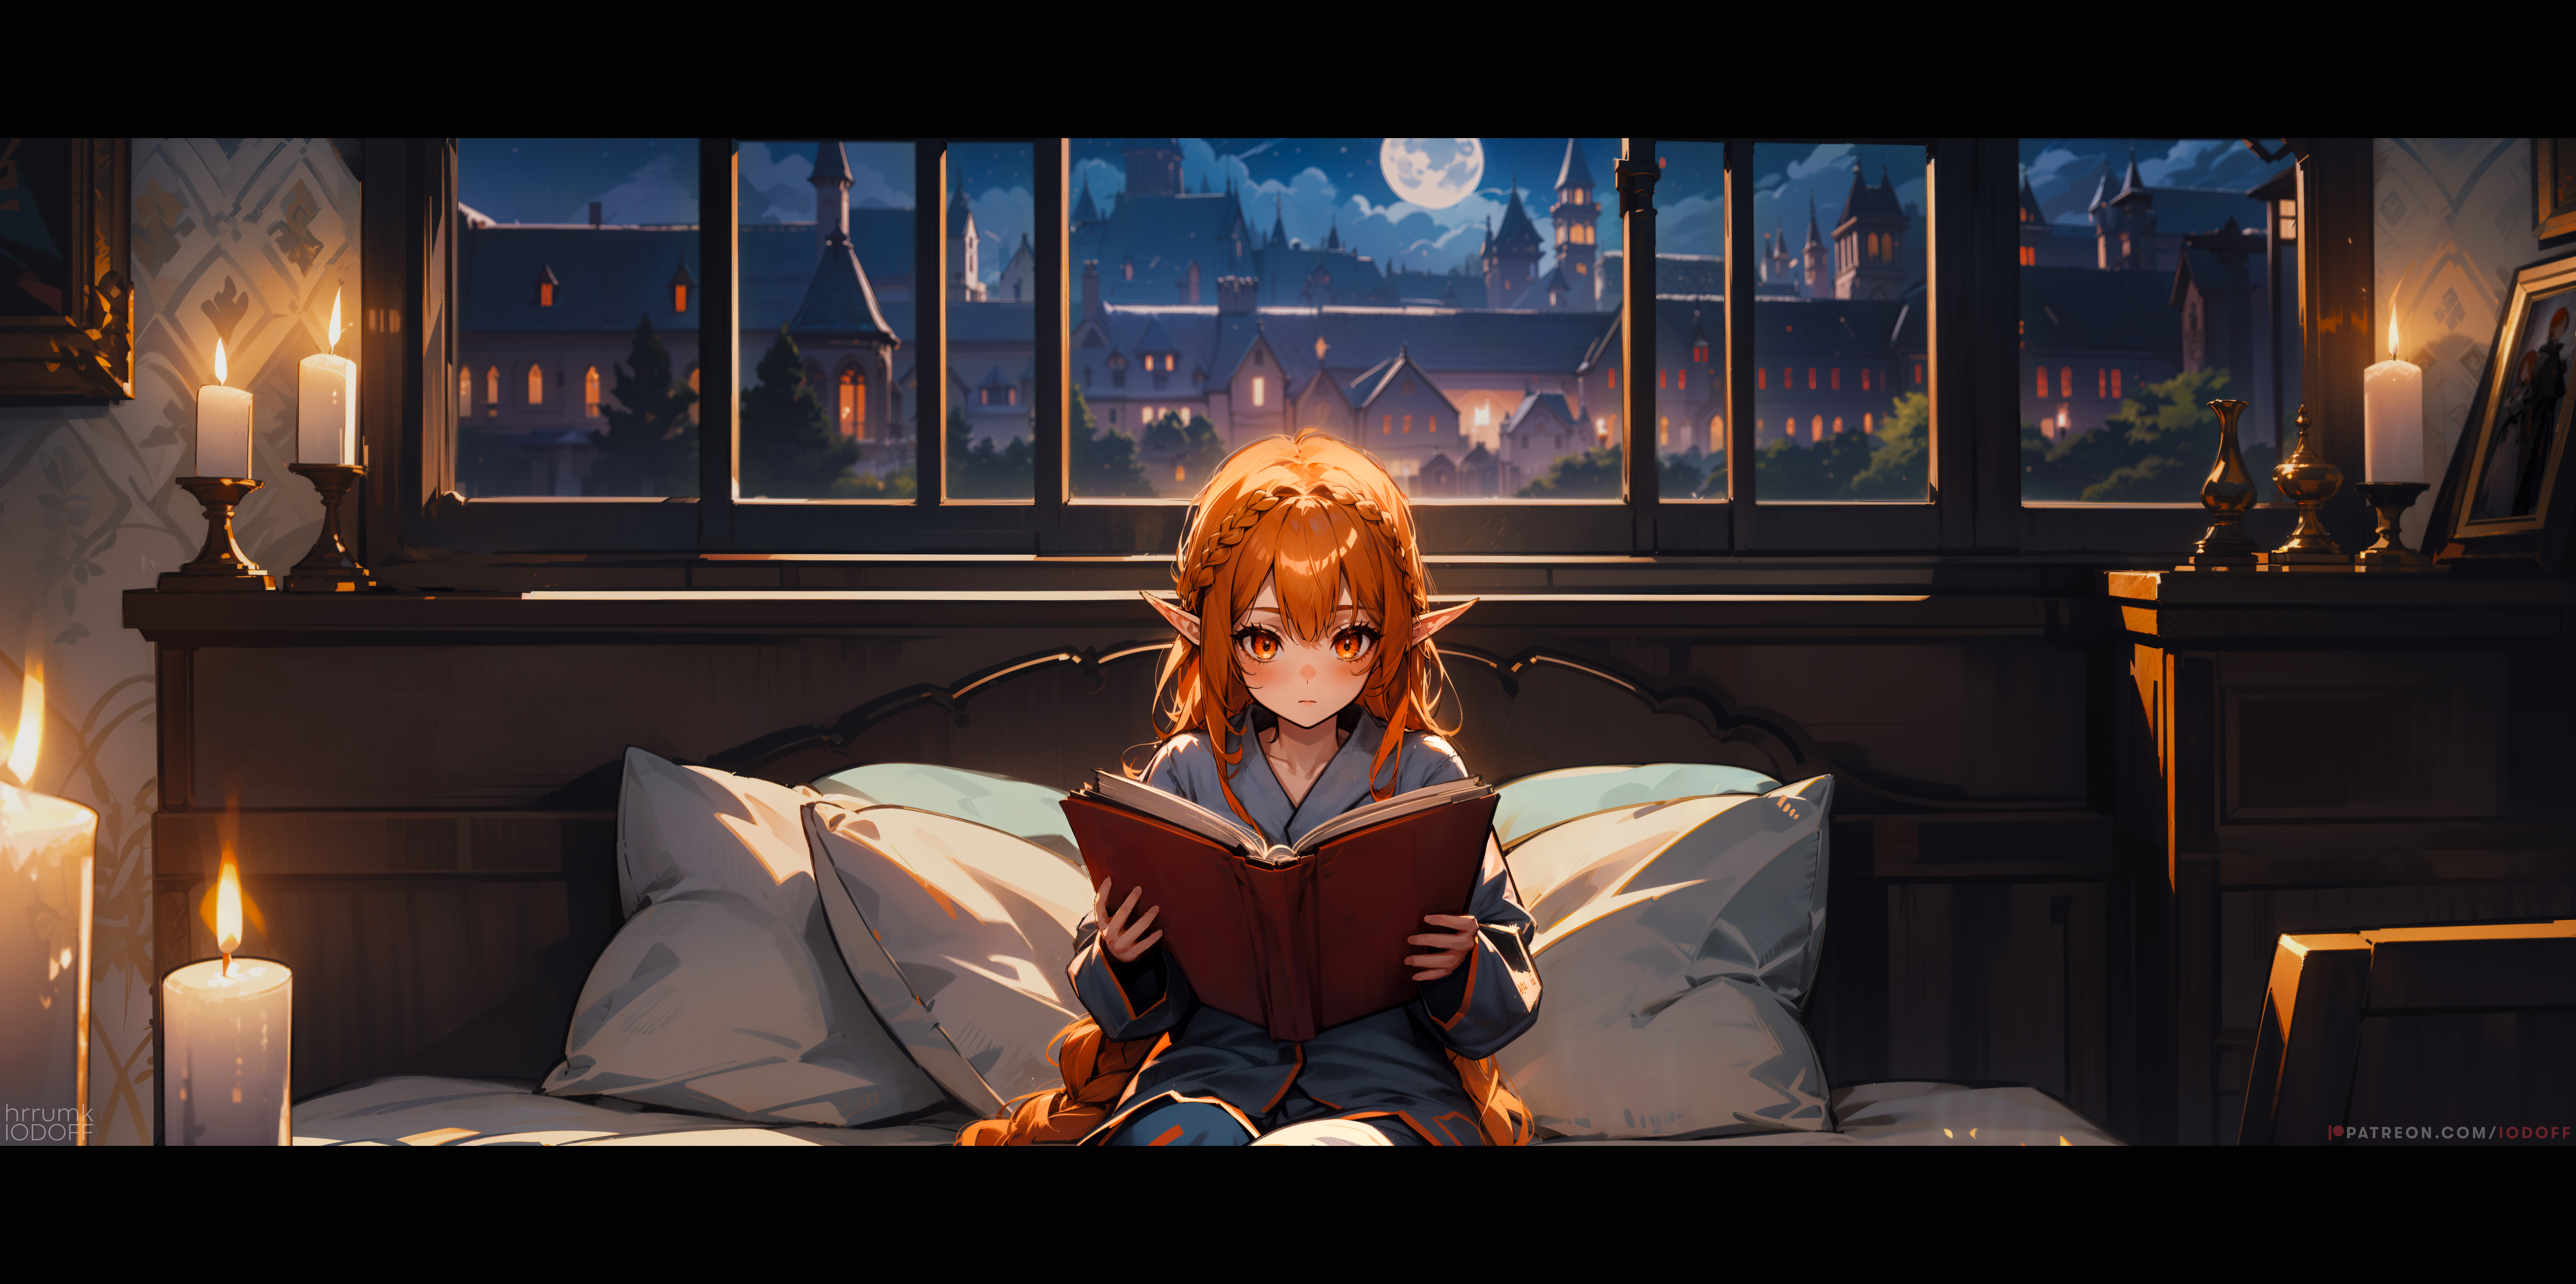 Anime 10368x5168 Iodoff AI art indoors standing anime girls orange eyes pointy ears reading book in hand bed pyjamas Moon candles in bed books women indoors digital art blushing braids redhead closed mouth long hair watermarked moonlight night clouds fire building twintails window elves